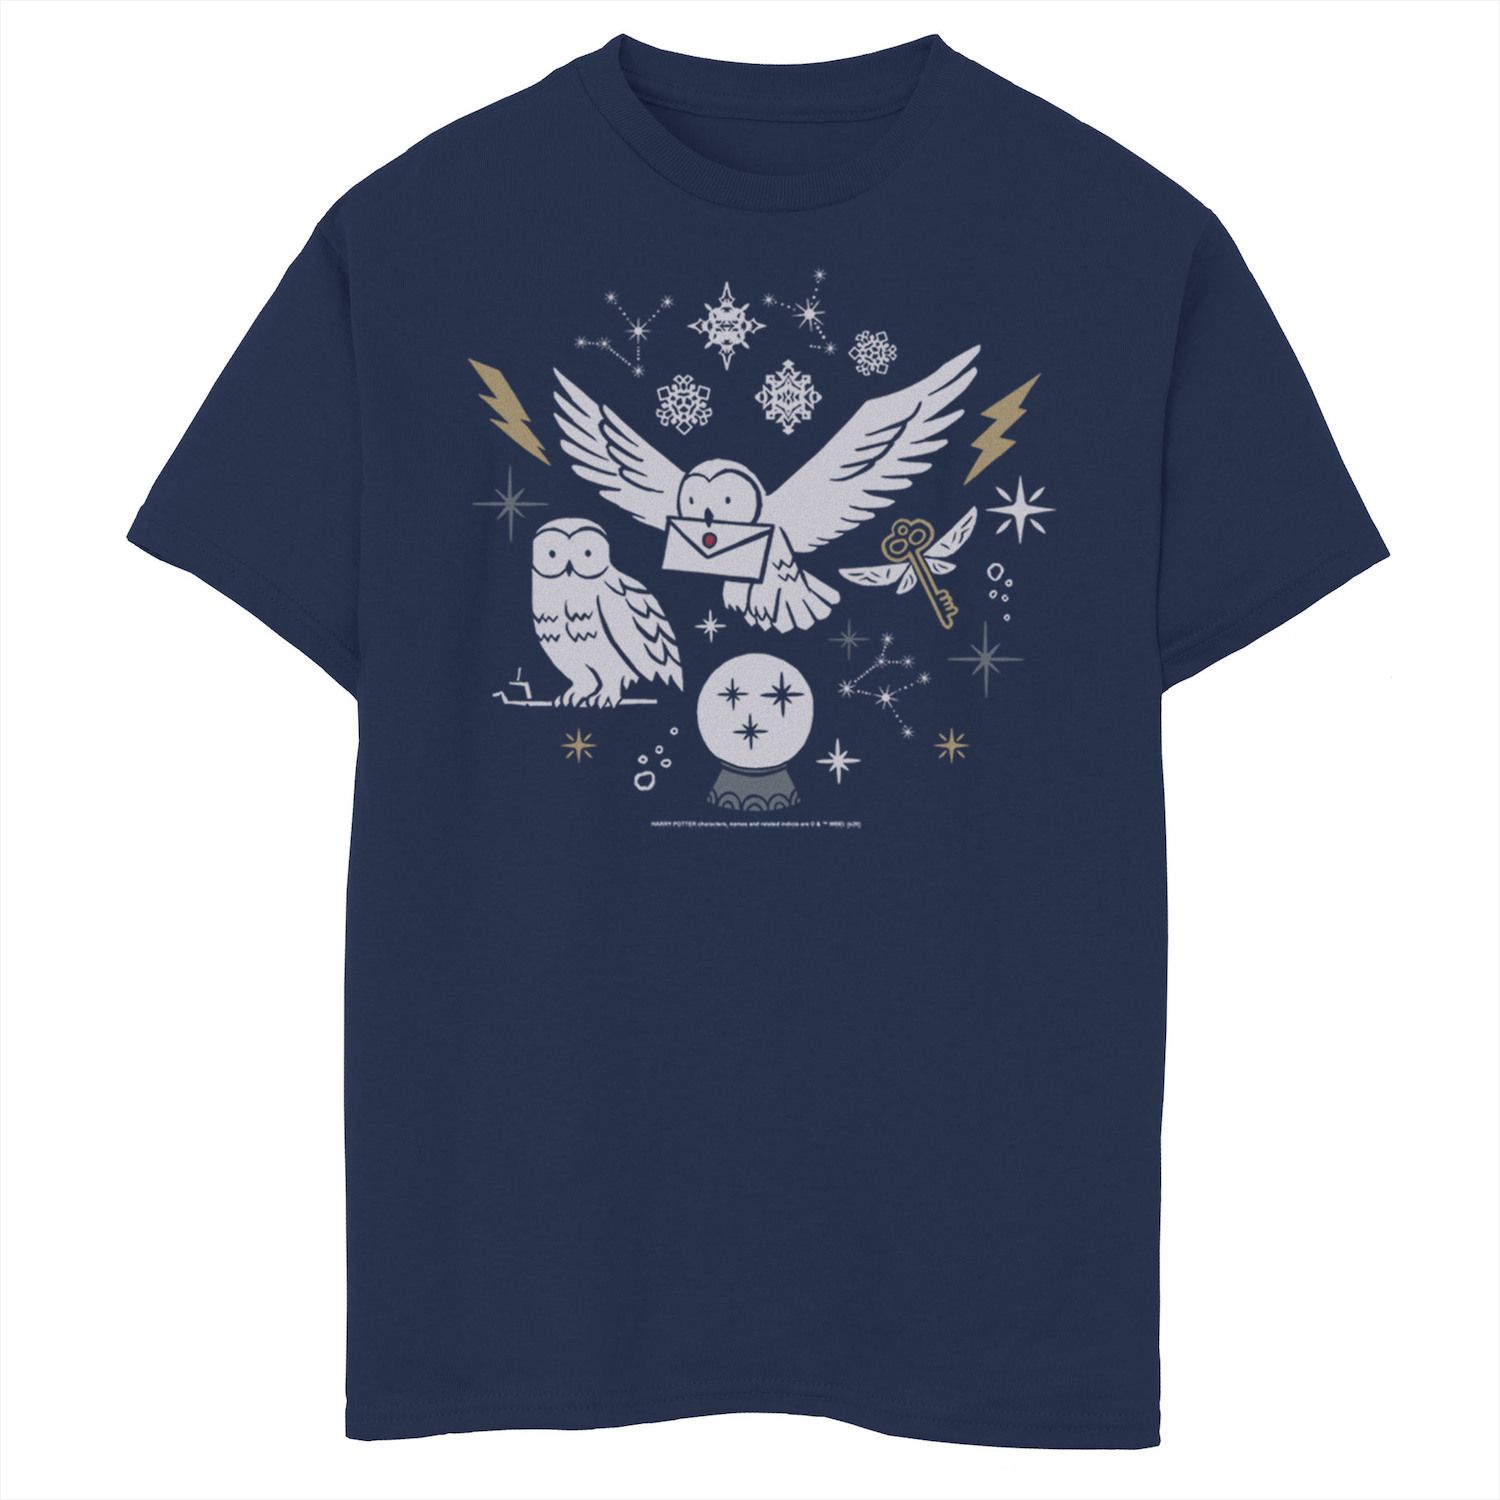 Image for Harry Potter Boys 8-20 Christmas Winter Owls Graphic Tee at Kohl's.